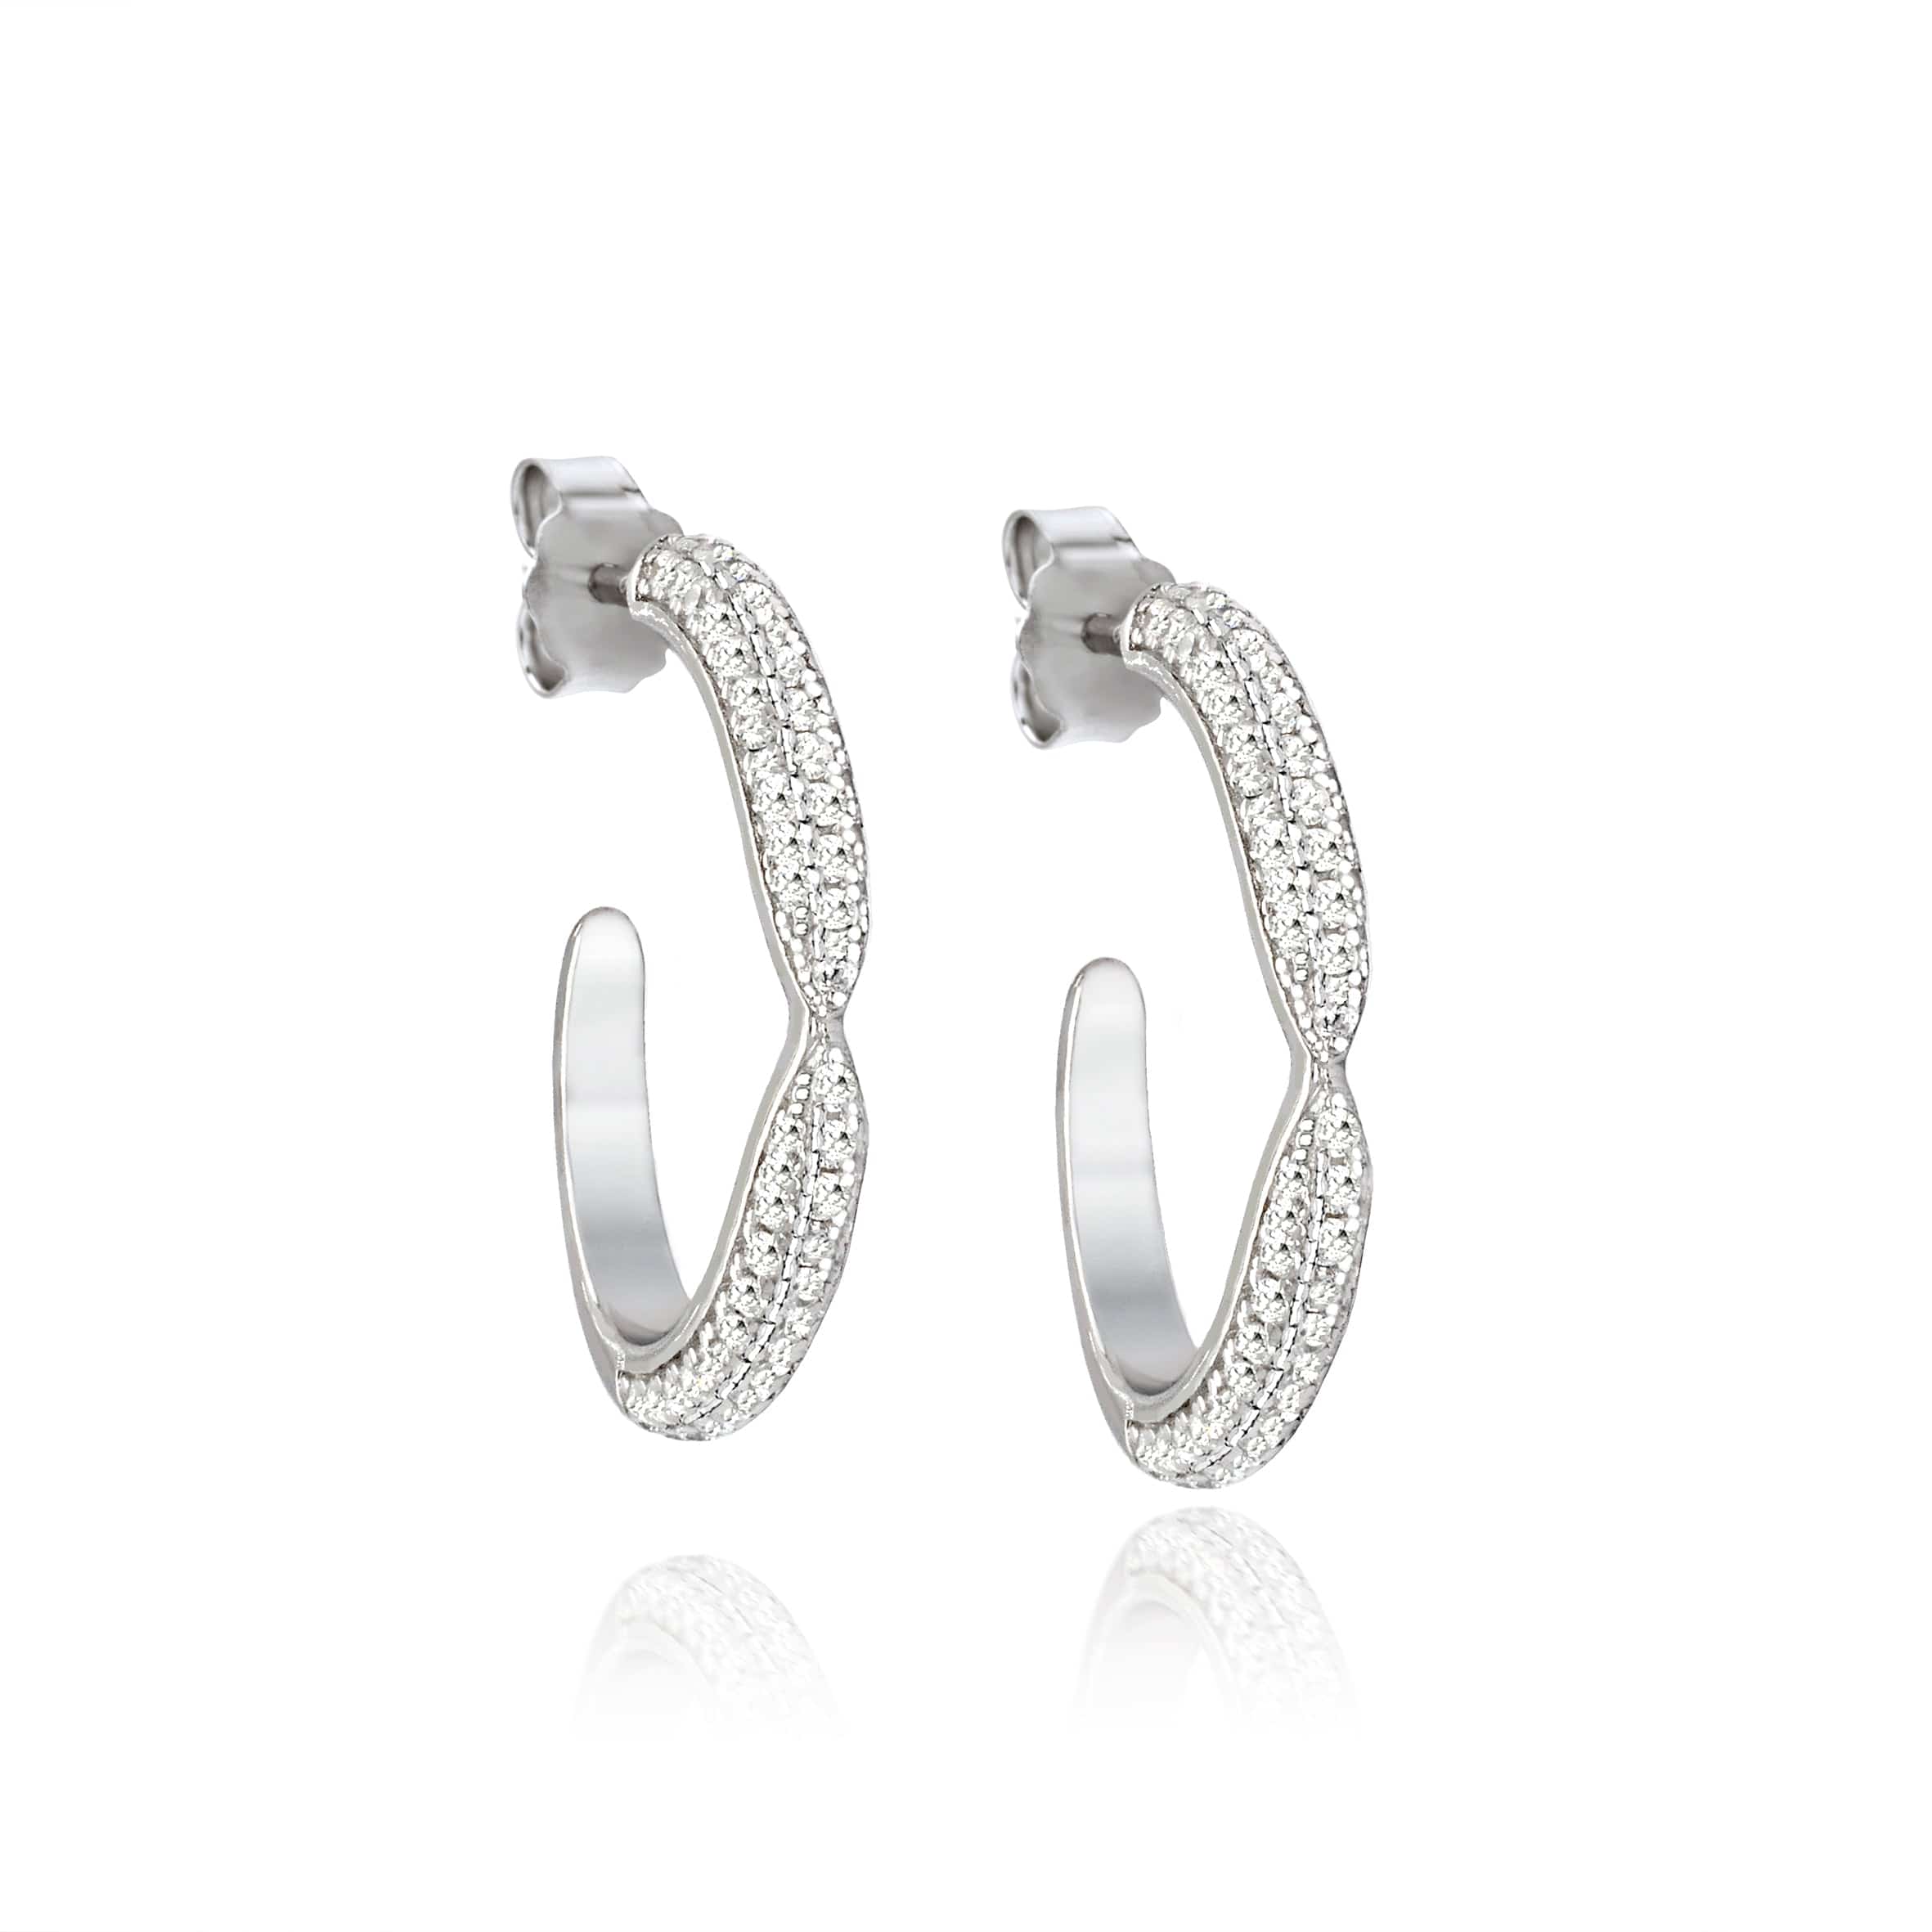 Lynora Silver Earring Sterling Silver / Clear Micro Pave Huggie Earrings